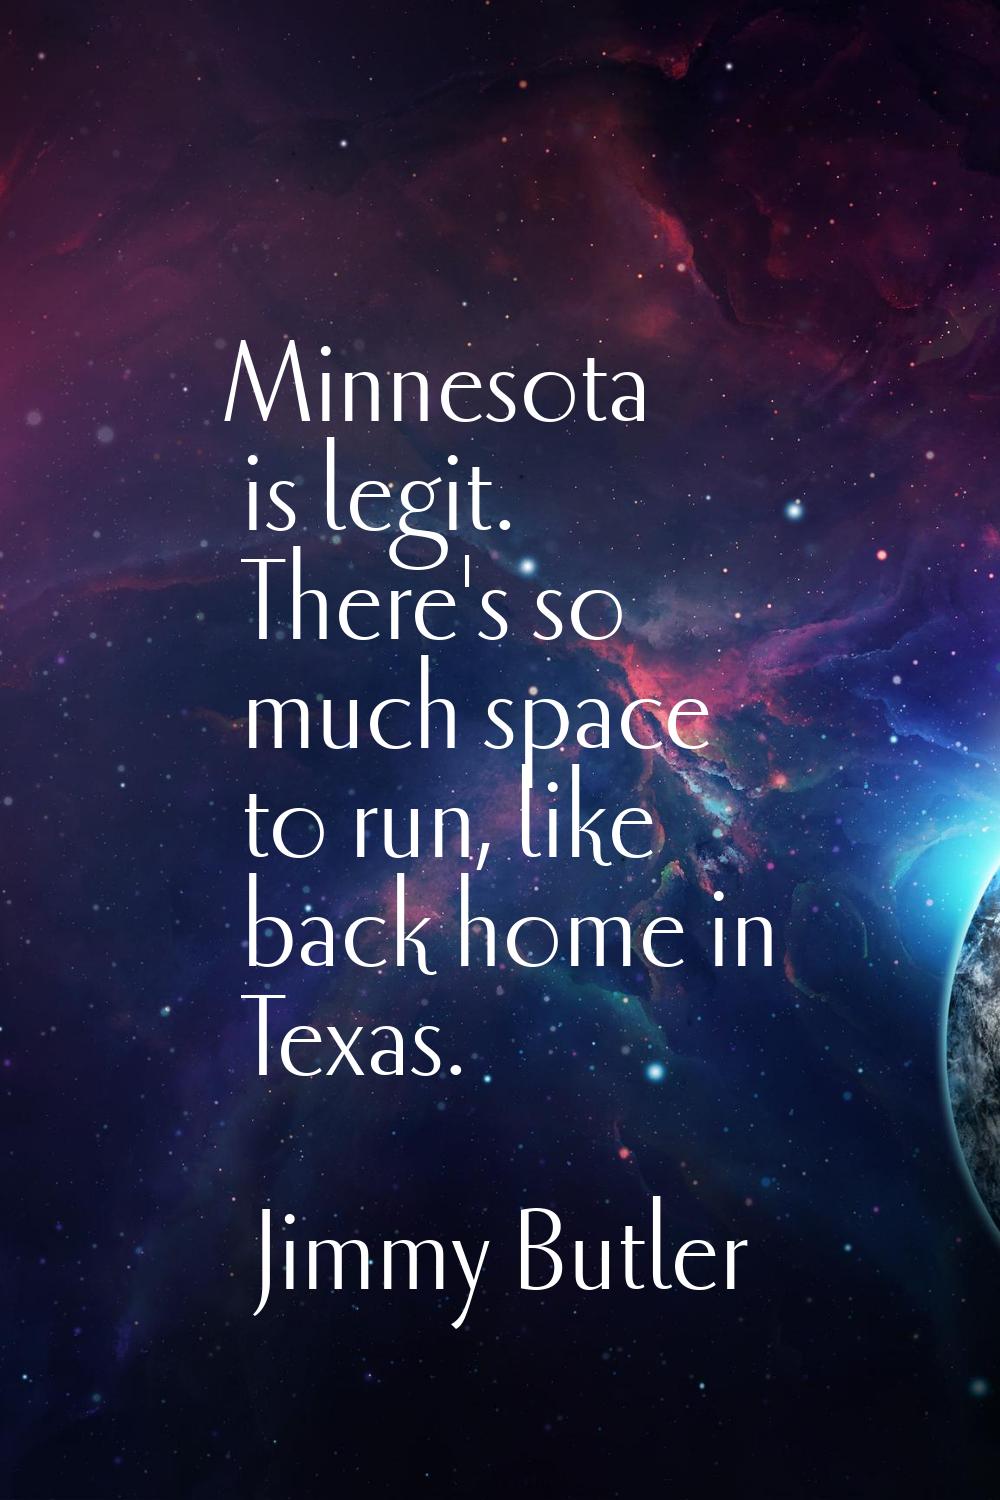 Minnesota is legit. There's so much space to run, like back home in Texas.